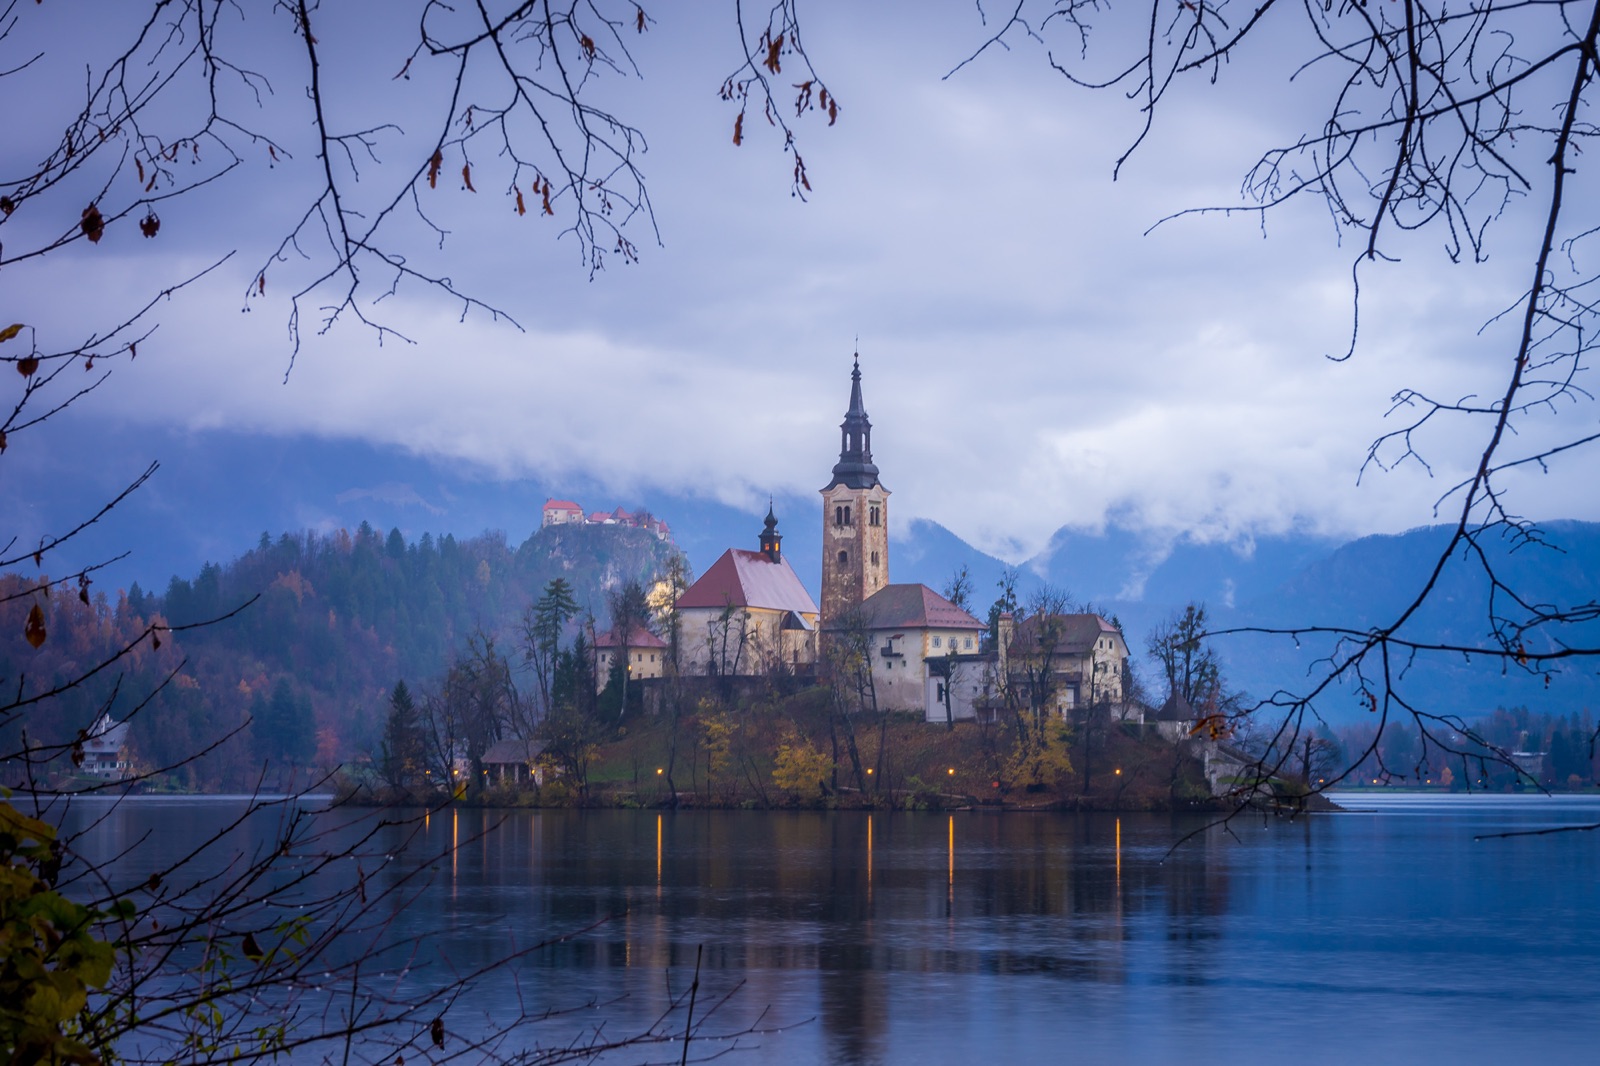 Lake Bled on an island with a body of water